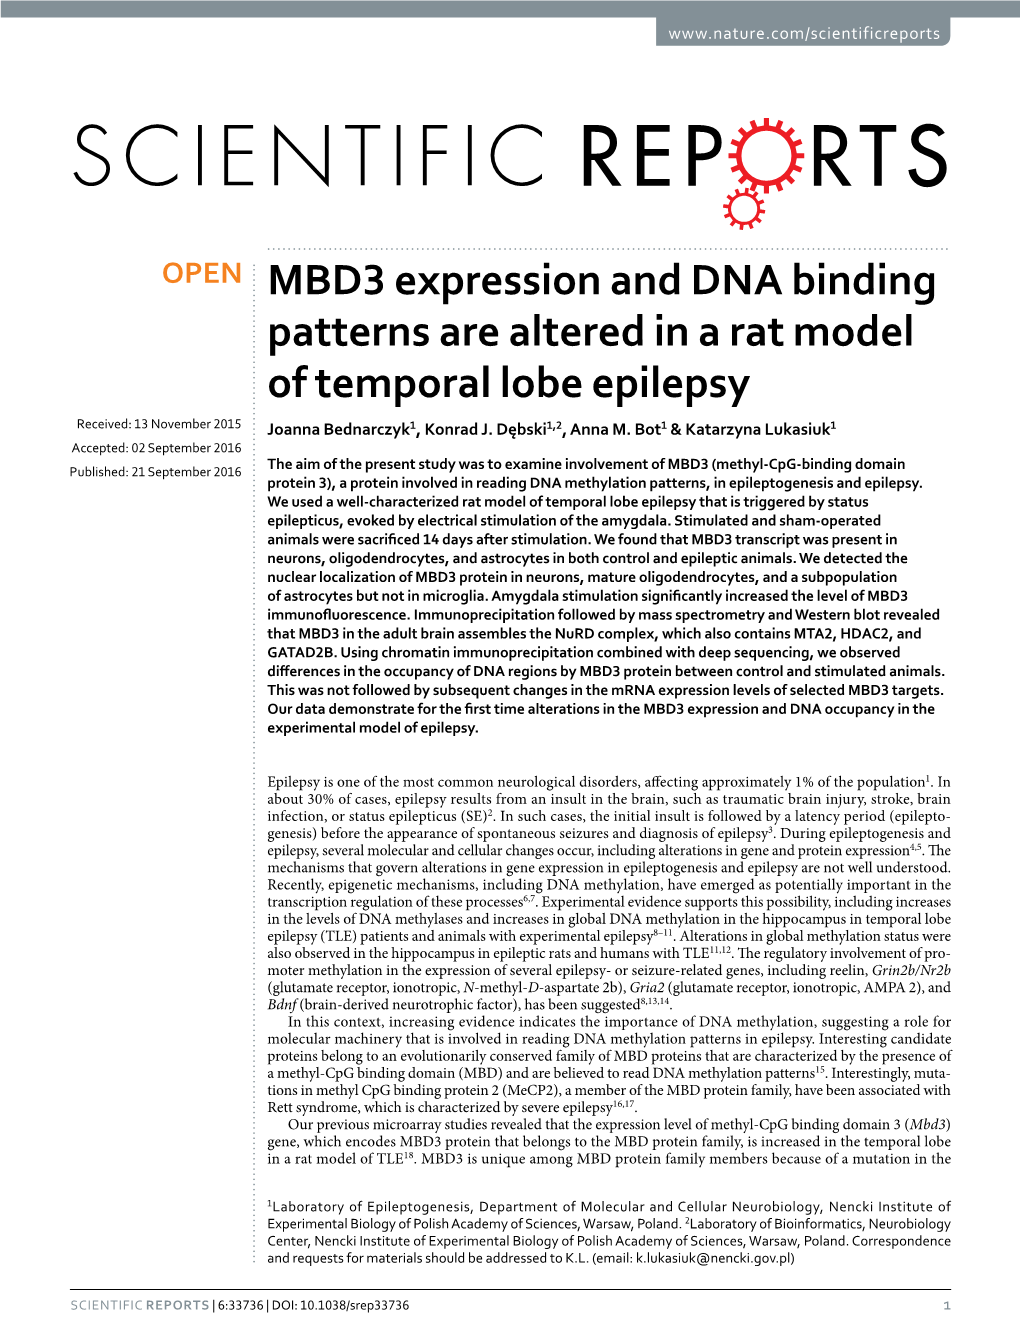 MBD3 Expression and DNA Binding Patterns Are Altered in a Rat Model of Temporal Lobe Epilepsy Received: 13 November 2015 Joanna Bednarczyk1, Konrad J